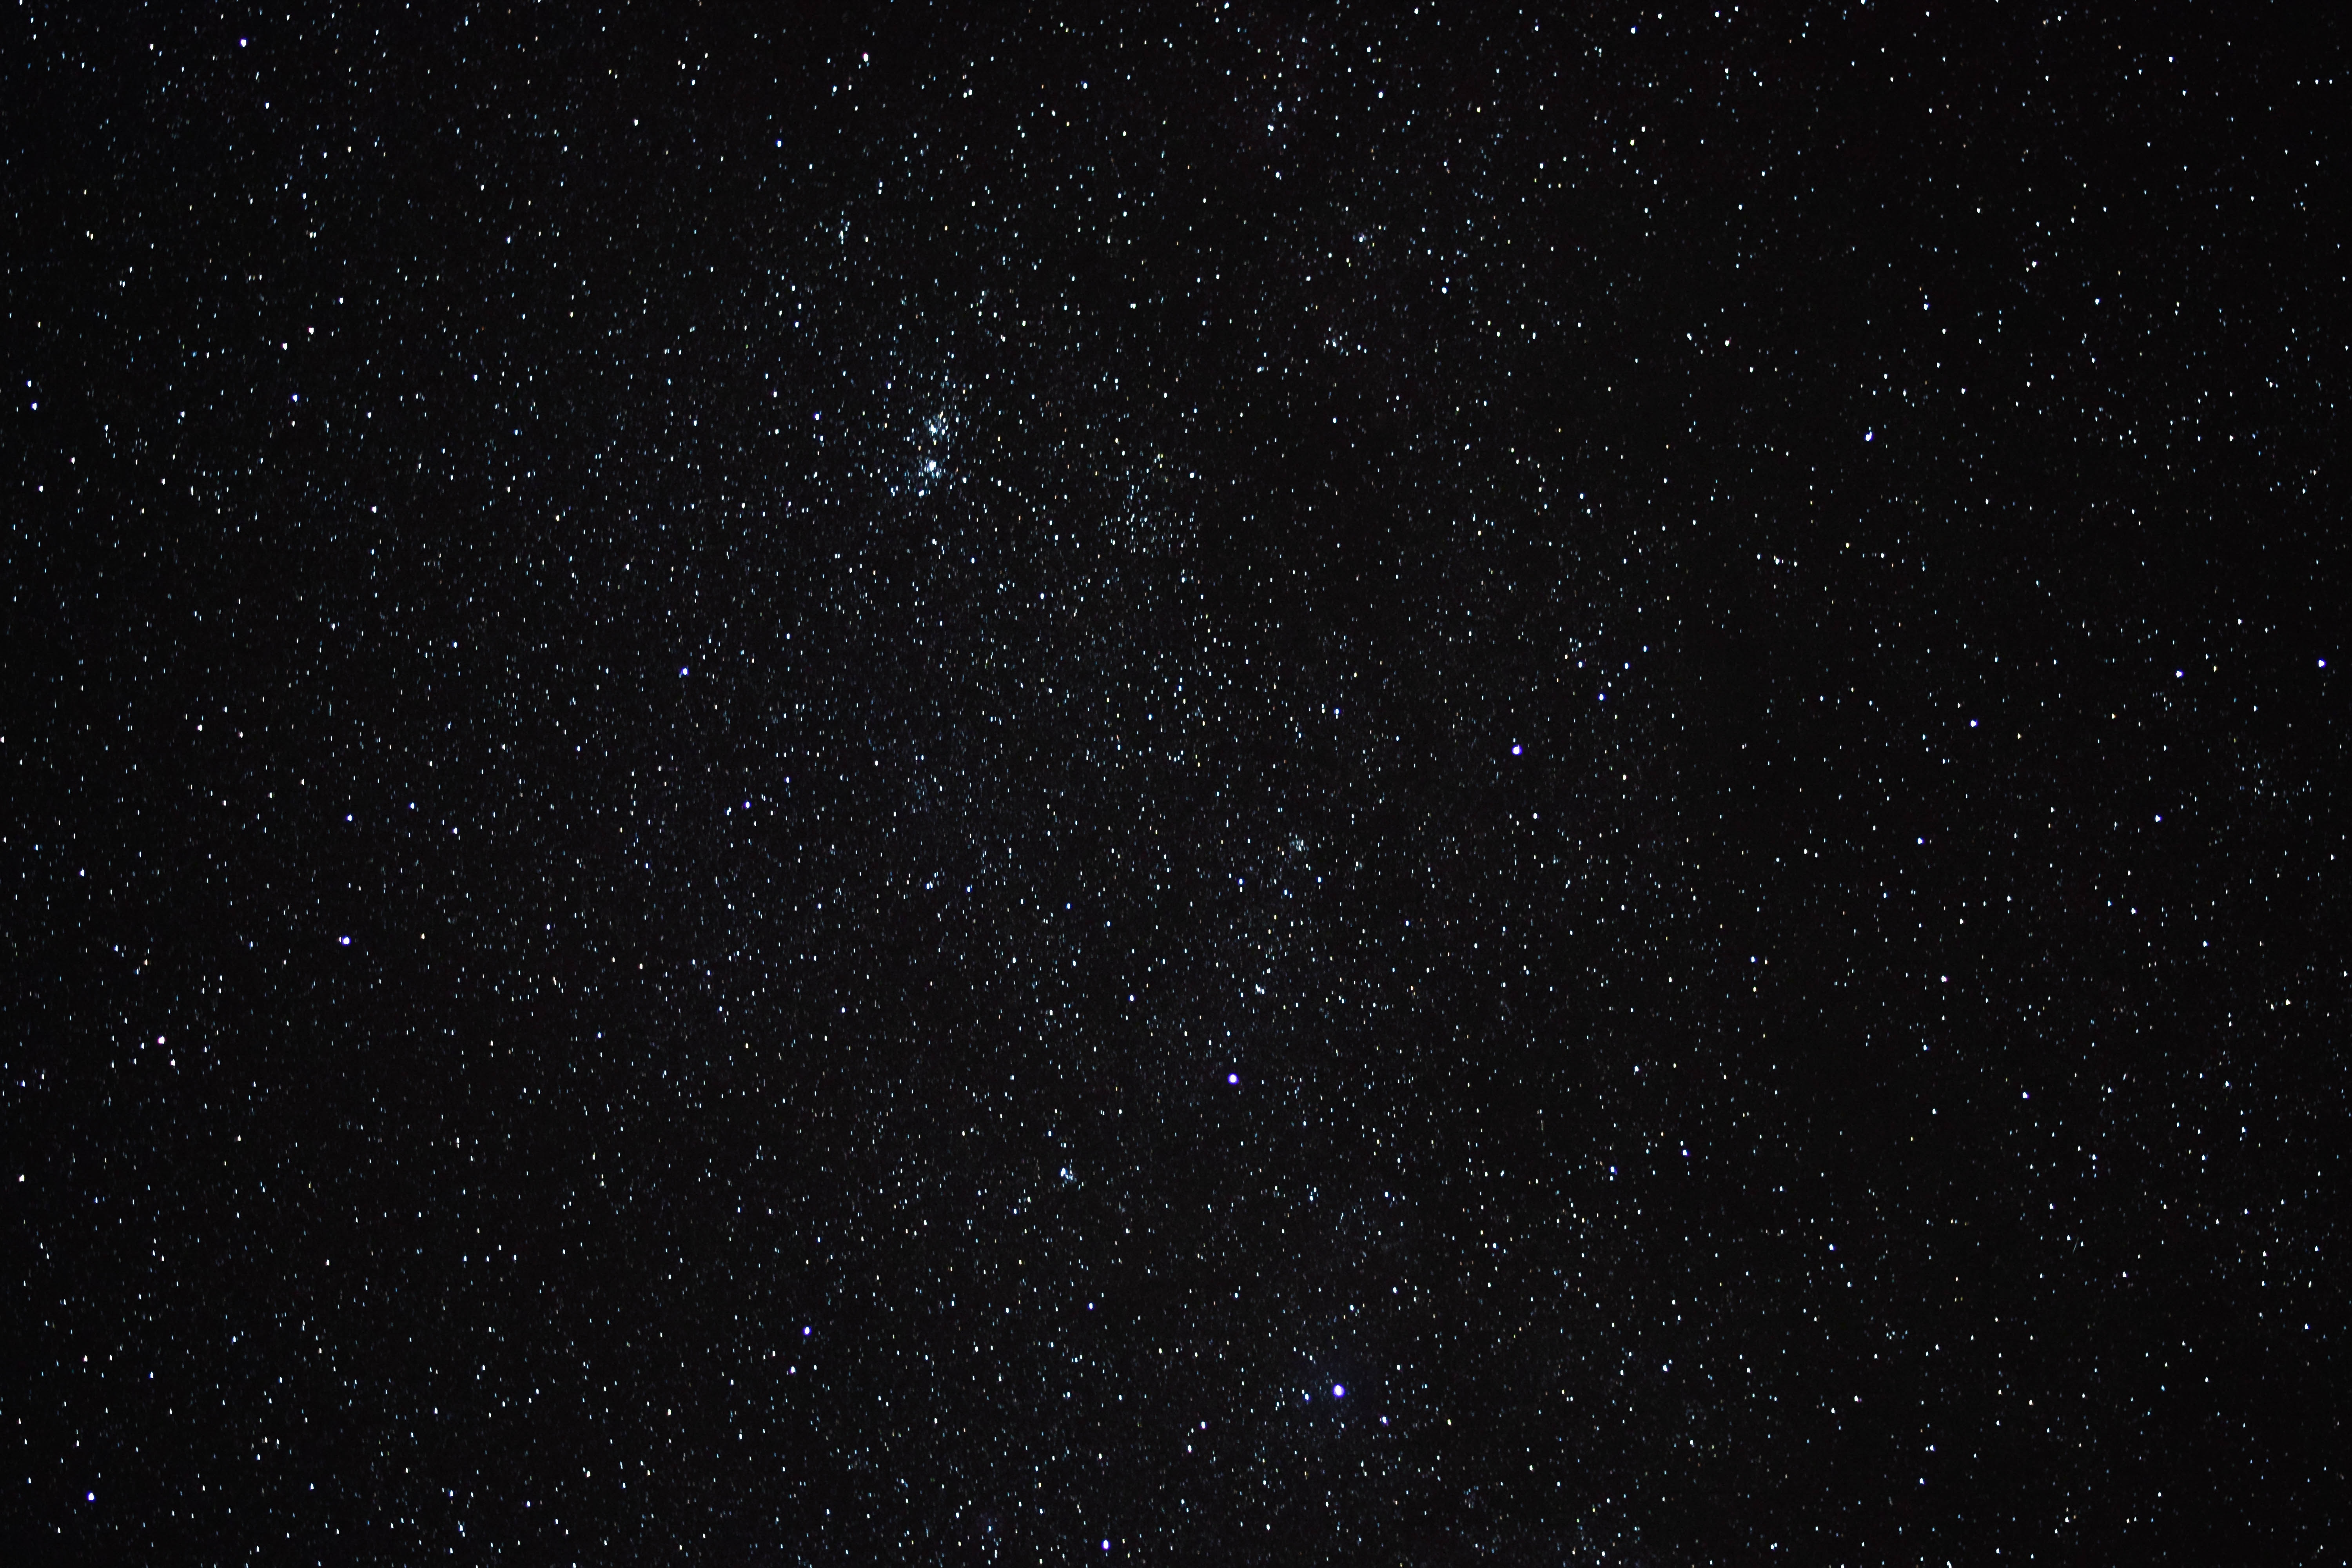 A photo of stars in the night sky, with some stars appearing brighter and larger than others due to post-processing techniques.